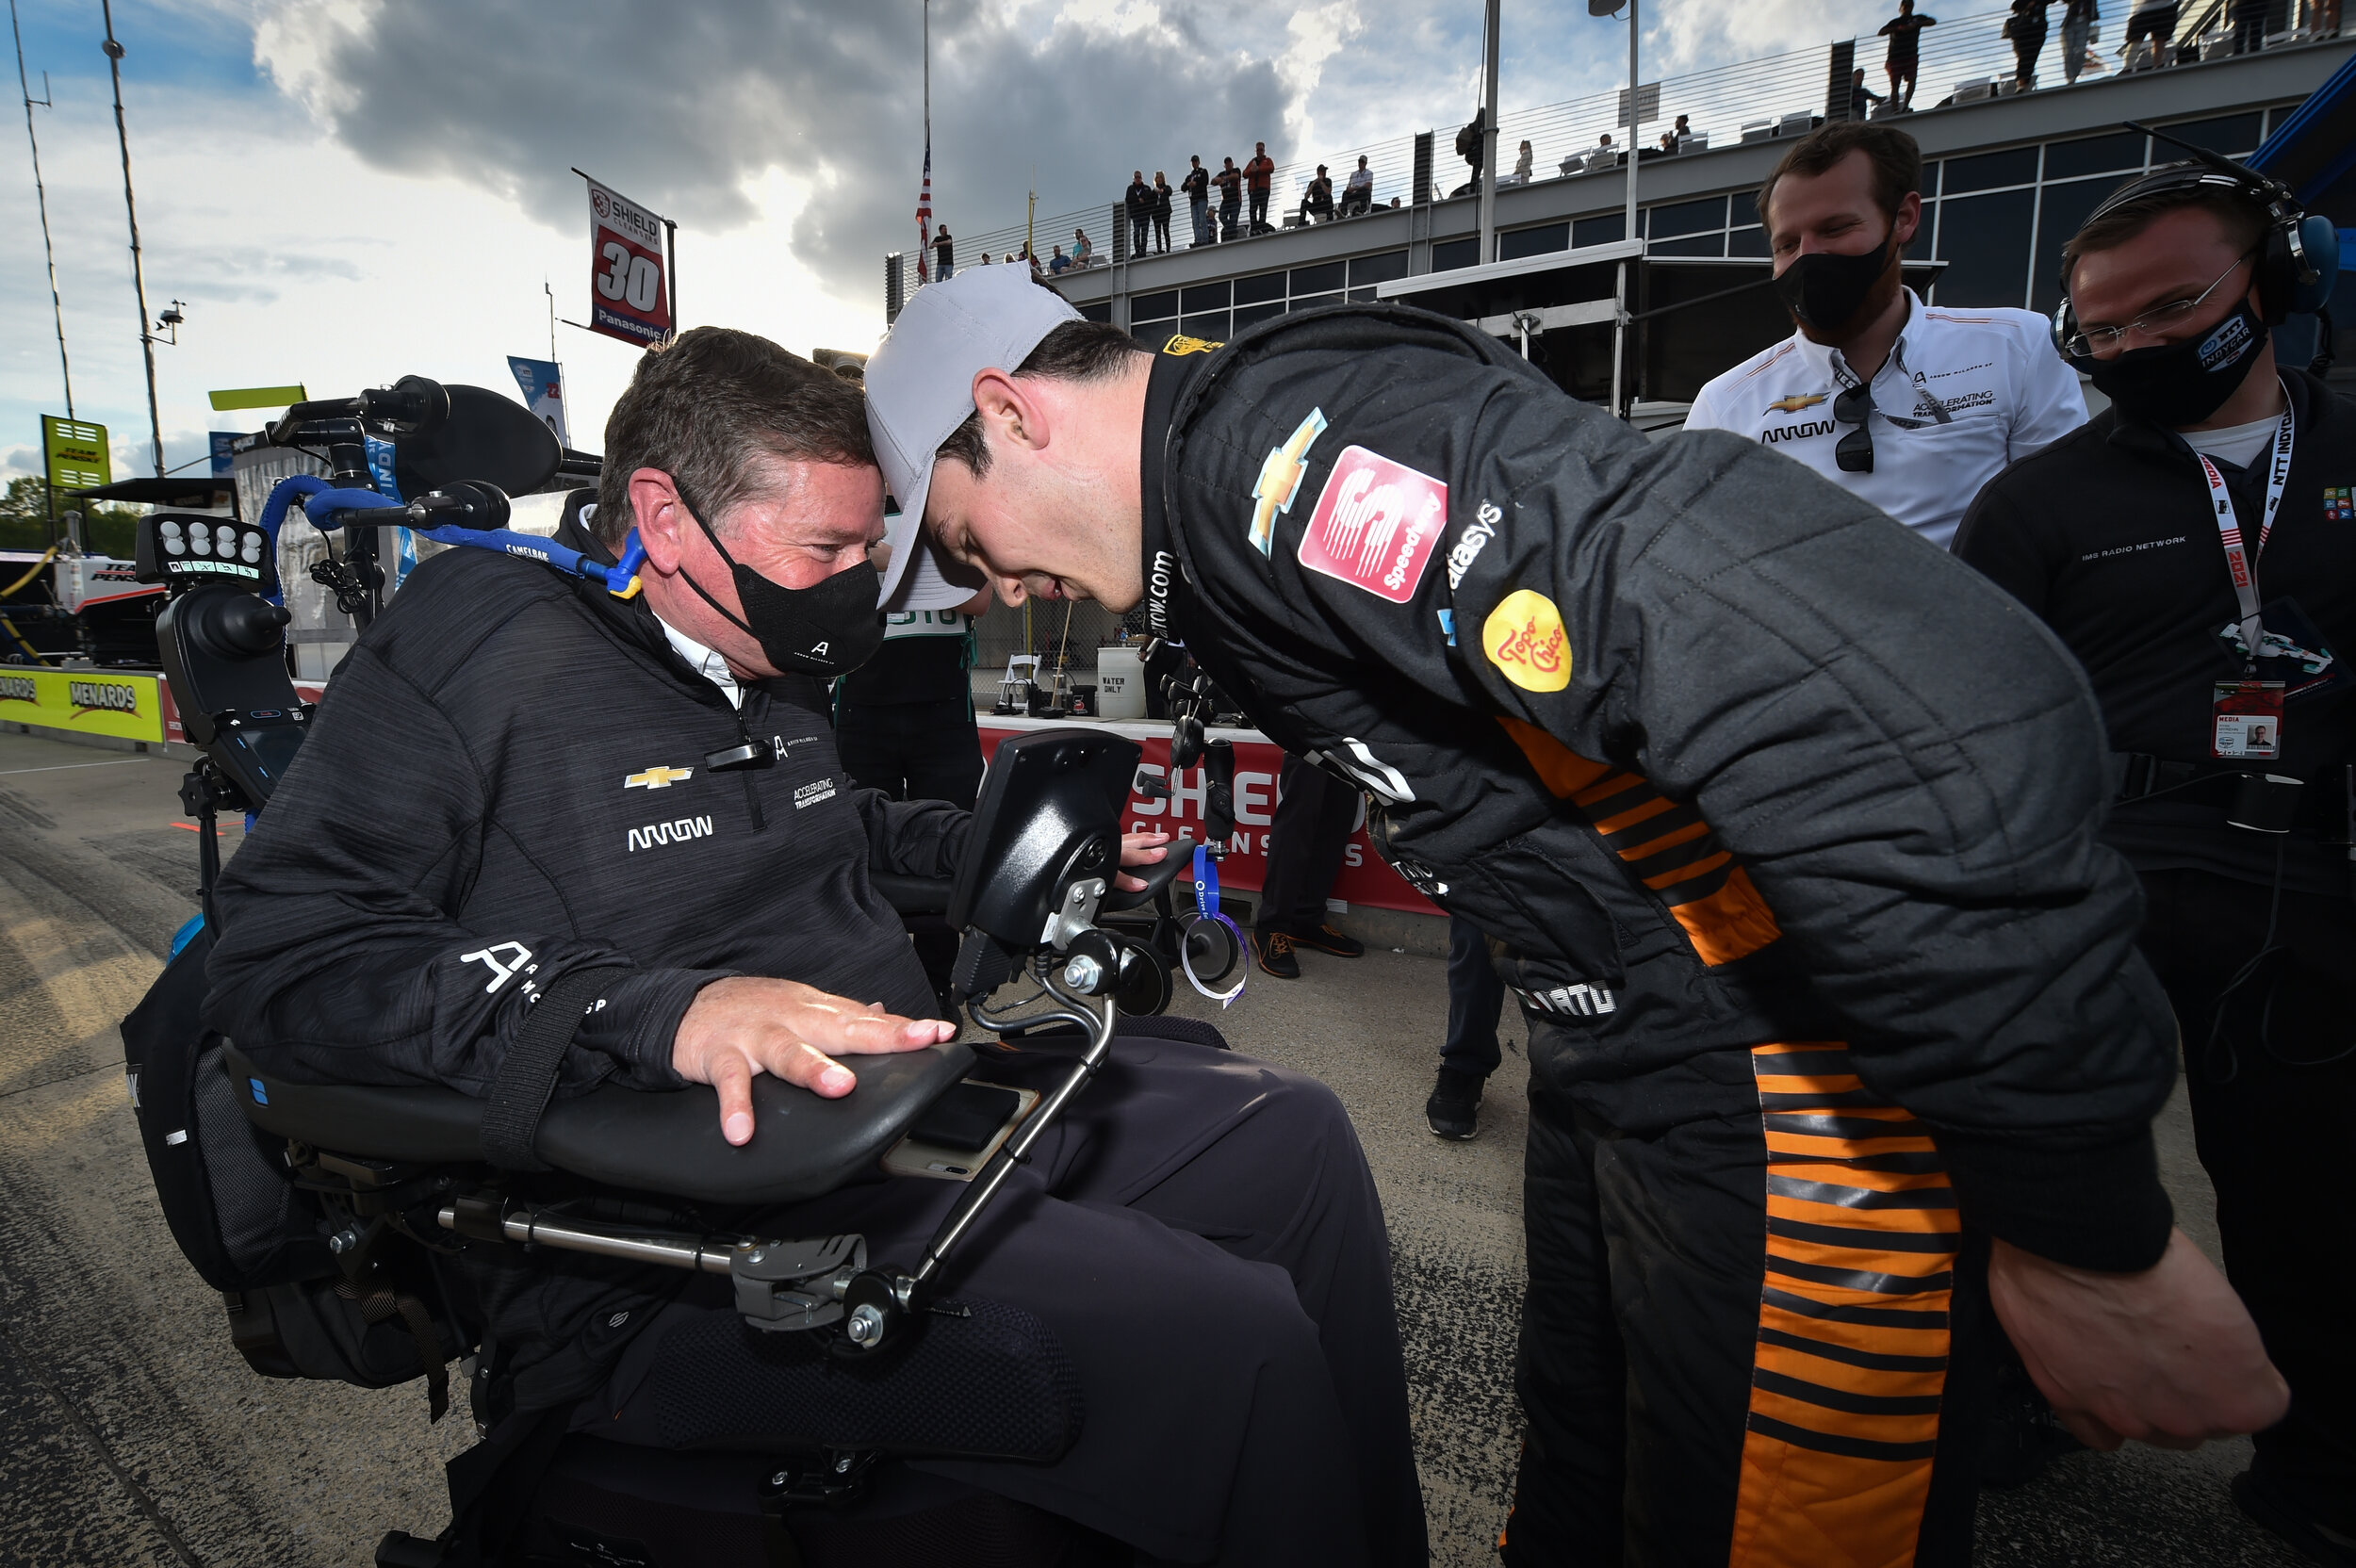  Pato O'Ward shares a moment with team owner Sam Schmidt. 